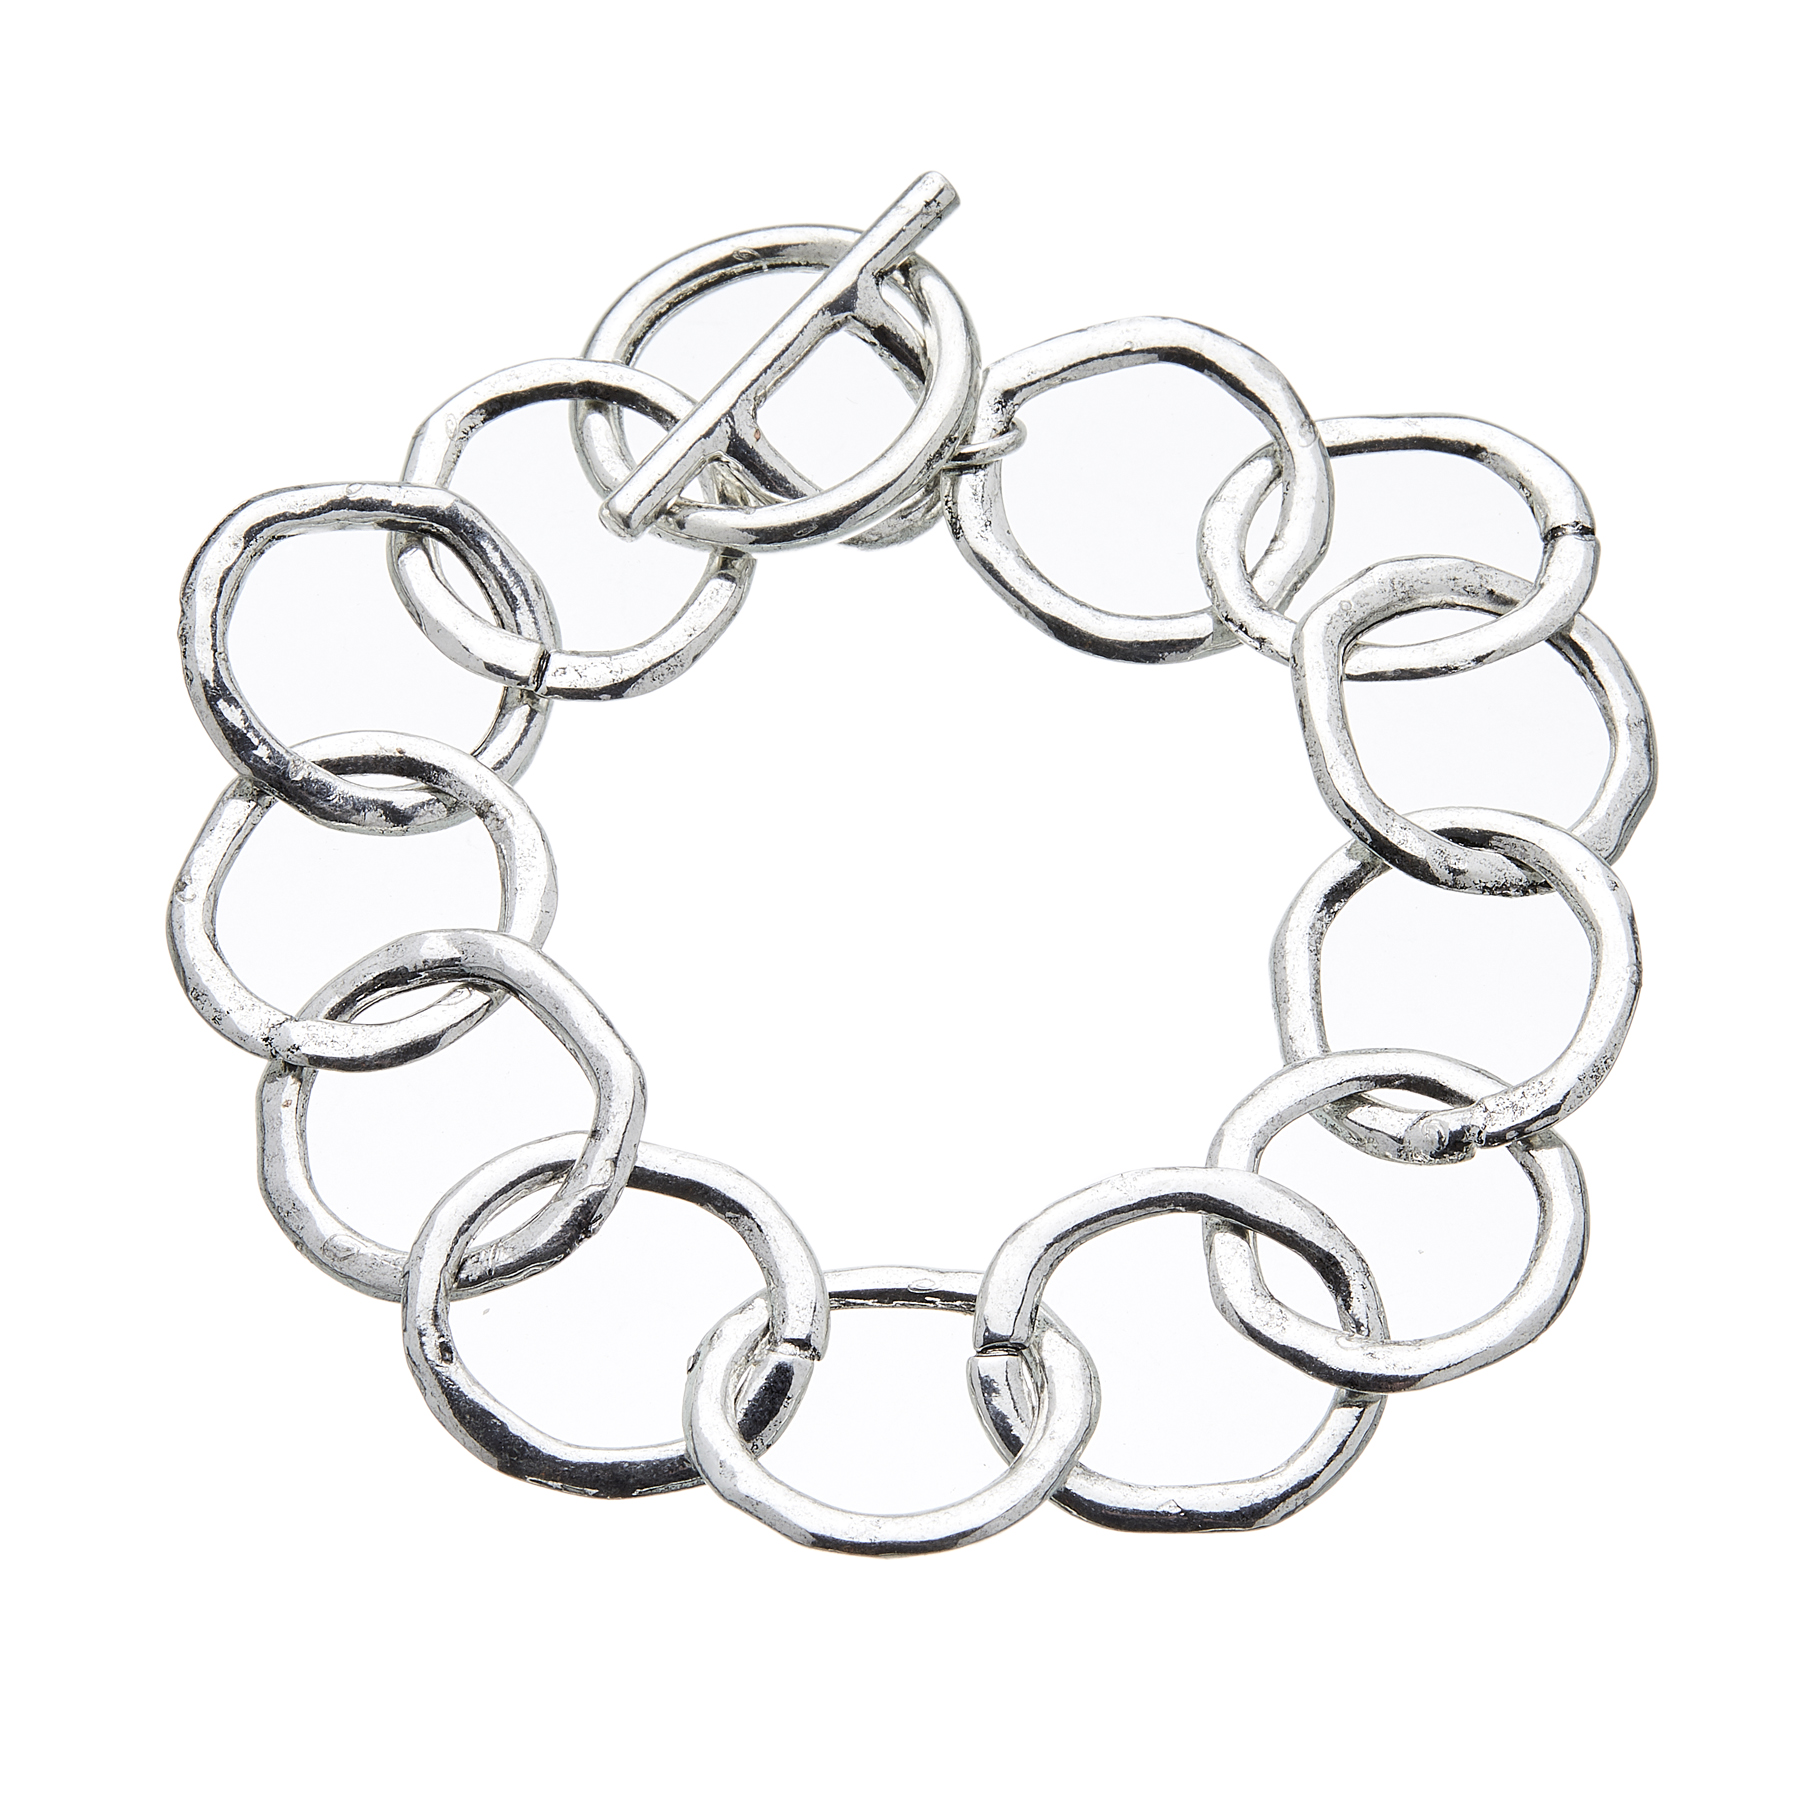 Silver T bar Bracelet with linked connecting circles - Jalen S